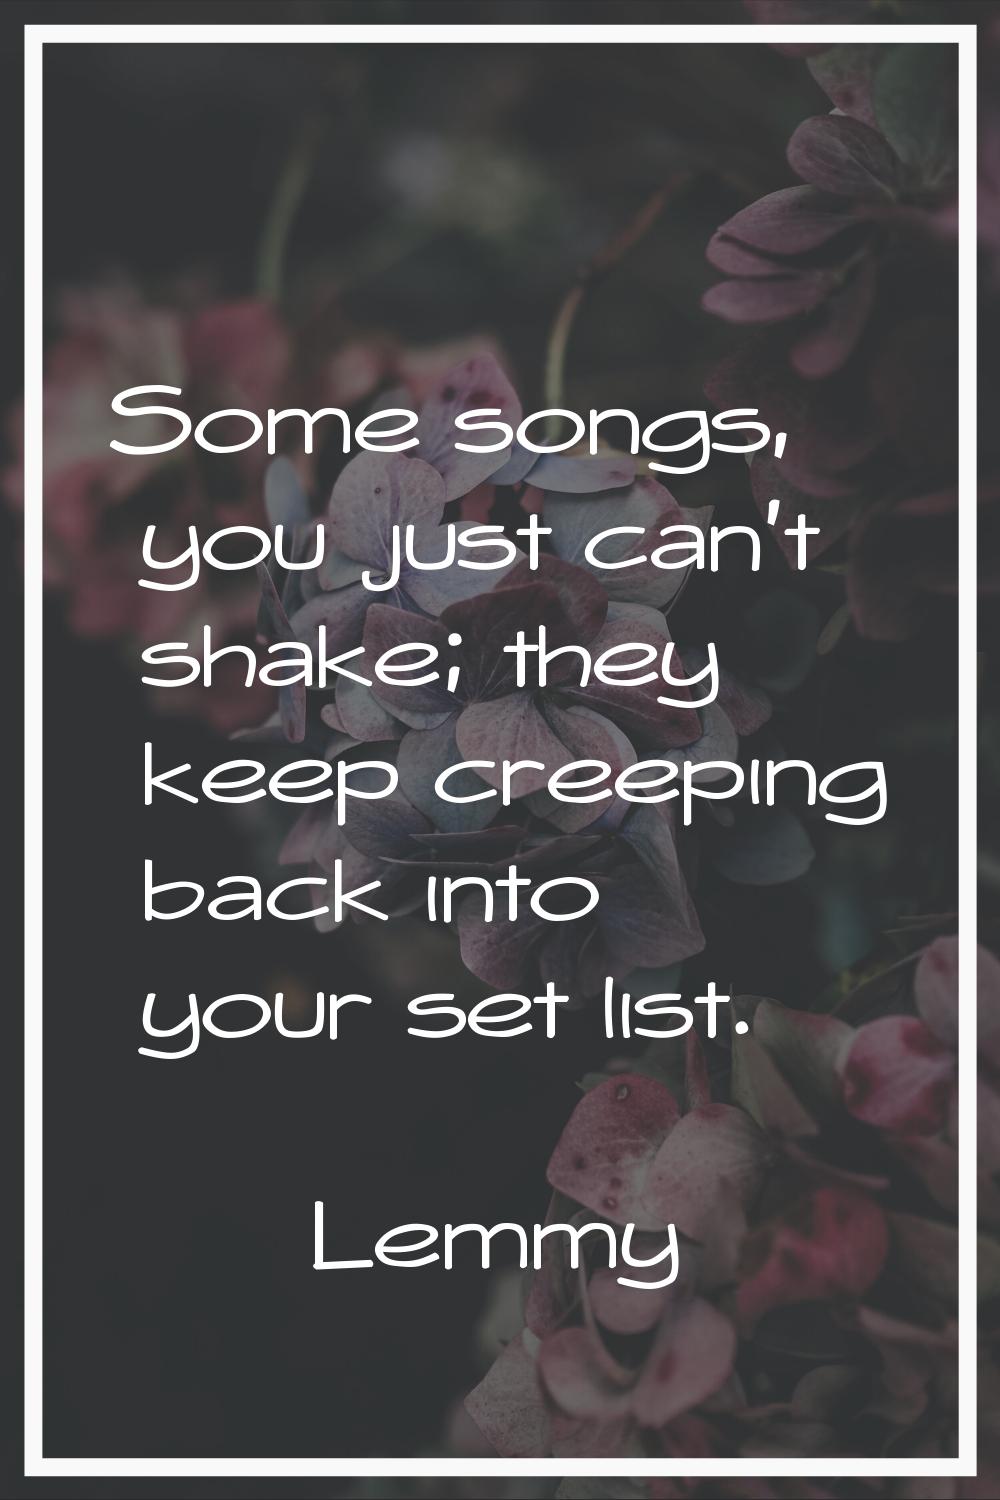 Some songs, you just can't shake; they keep creeping back into your set list.